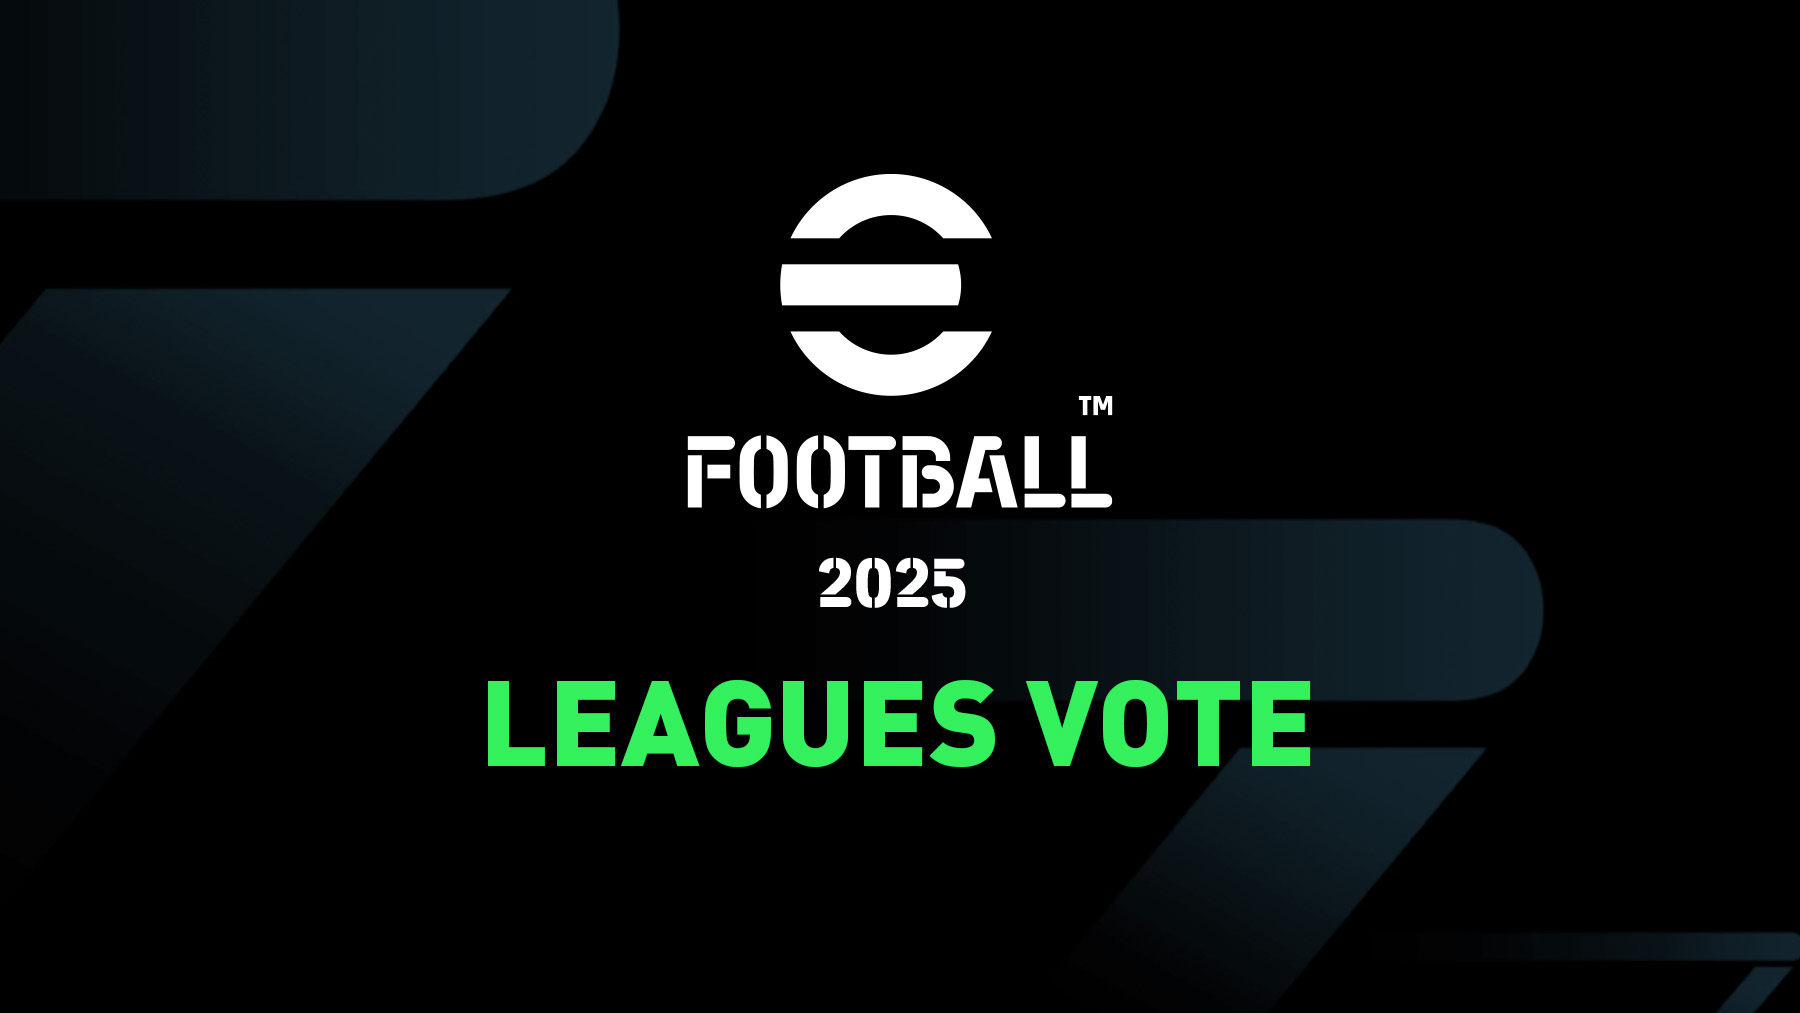 Vote for eFootball 2025 Leagues